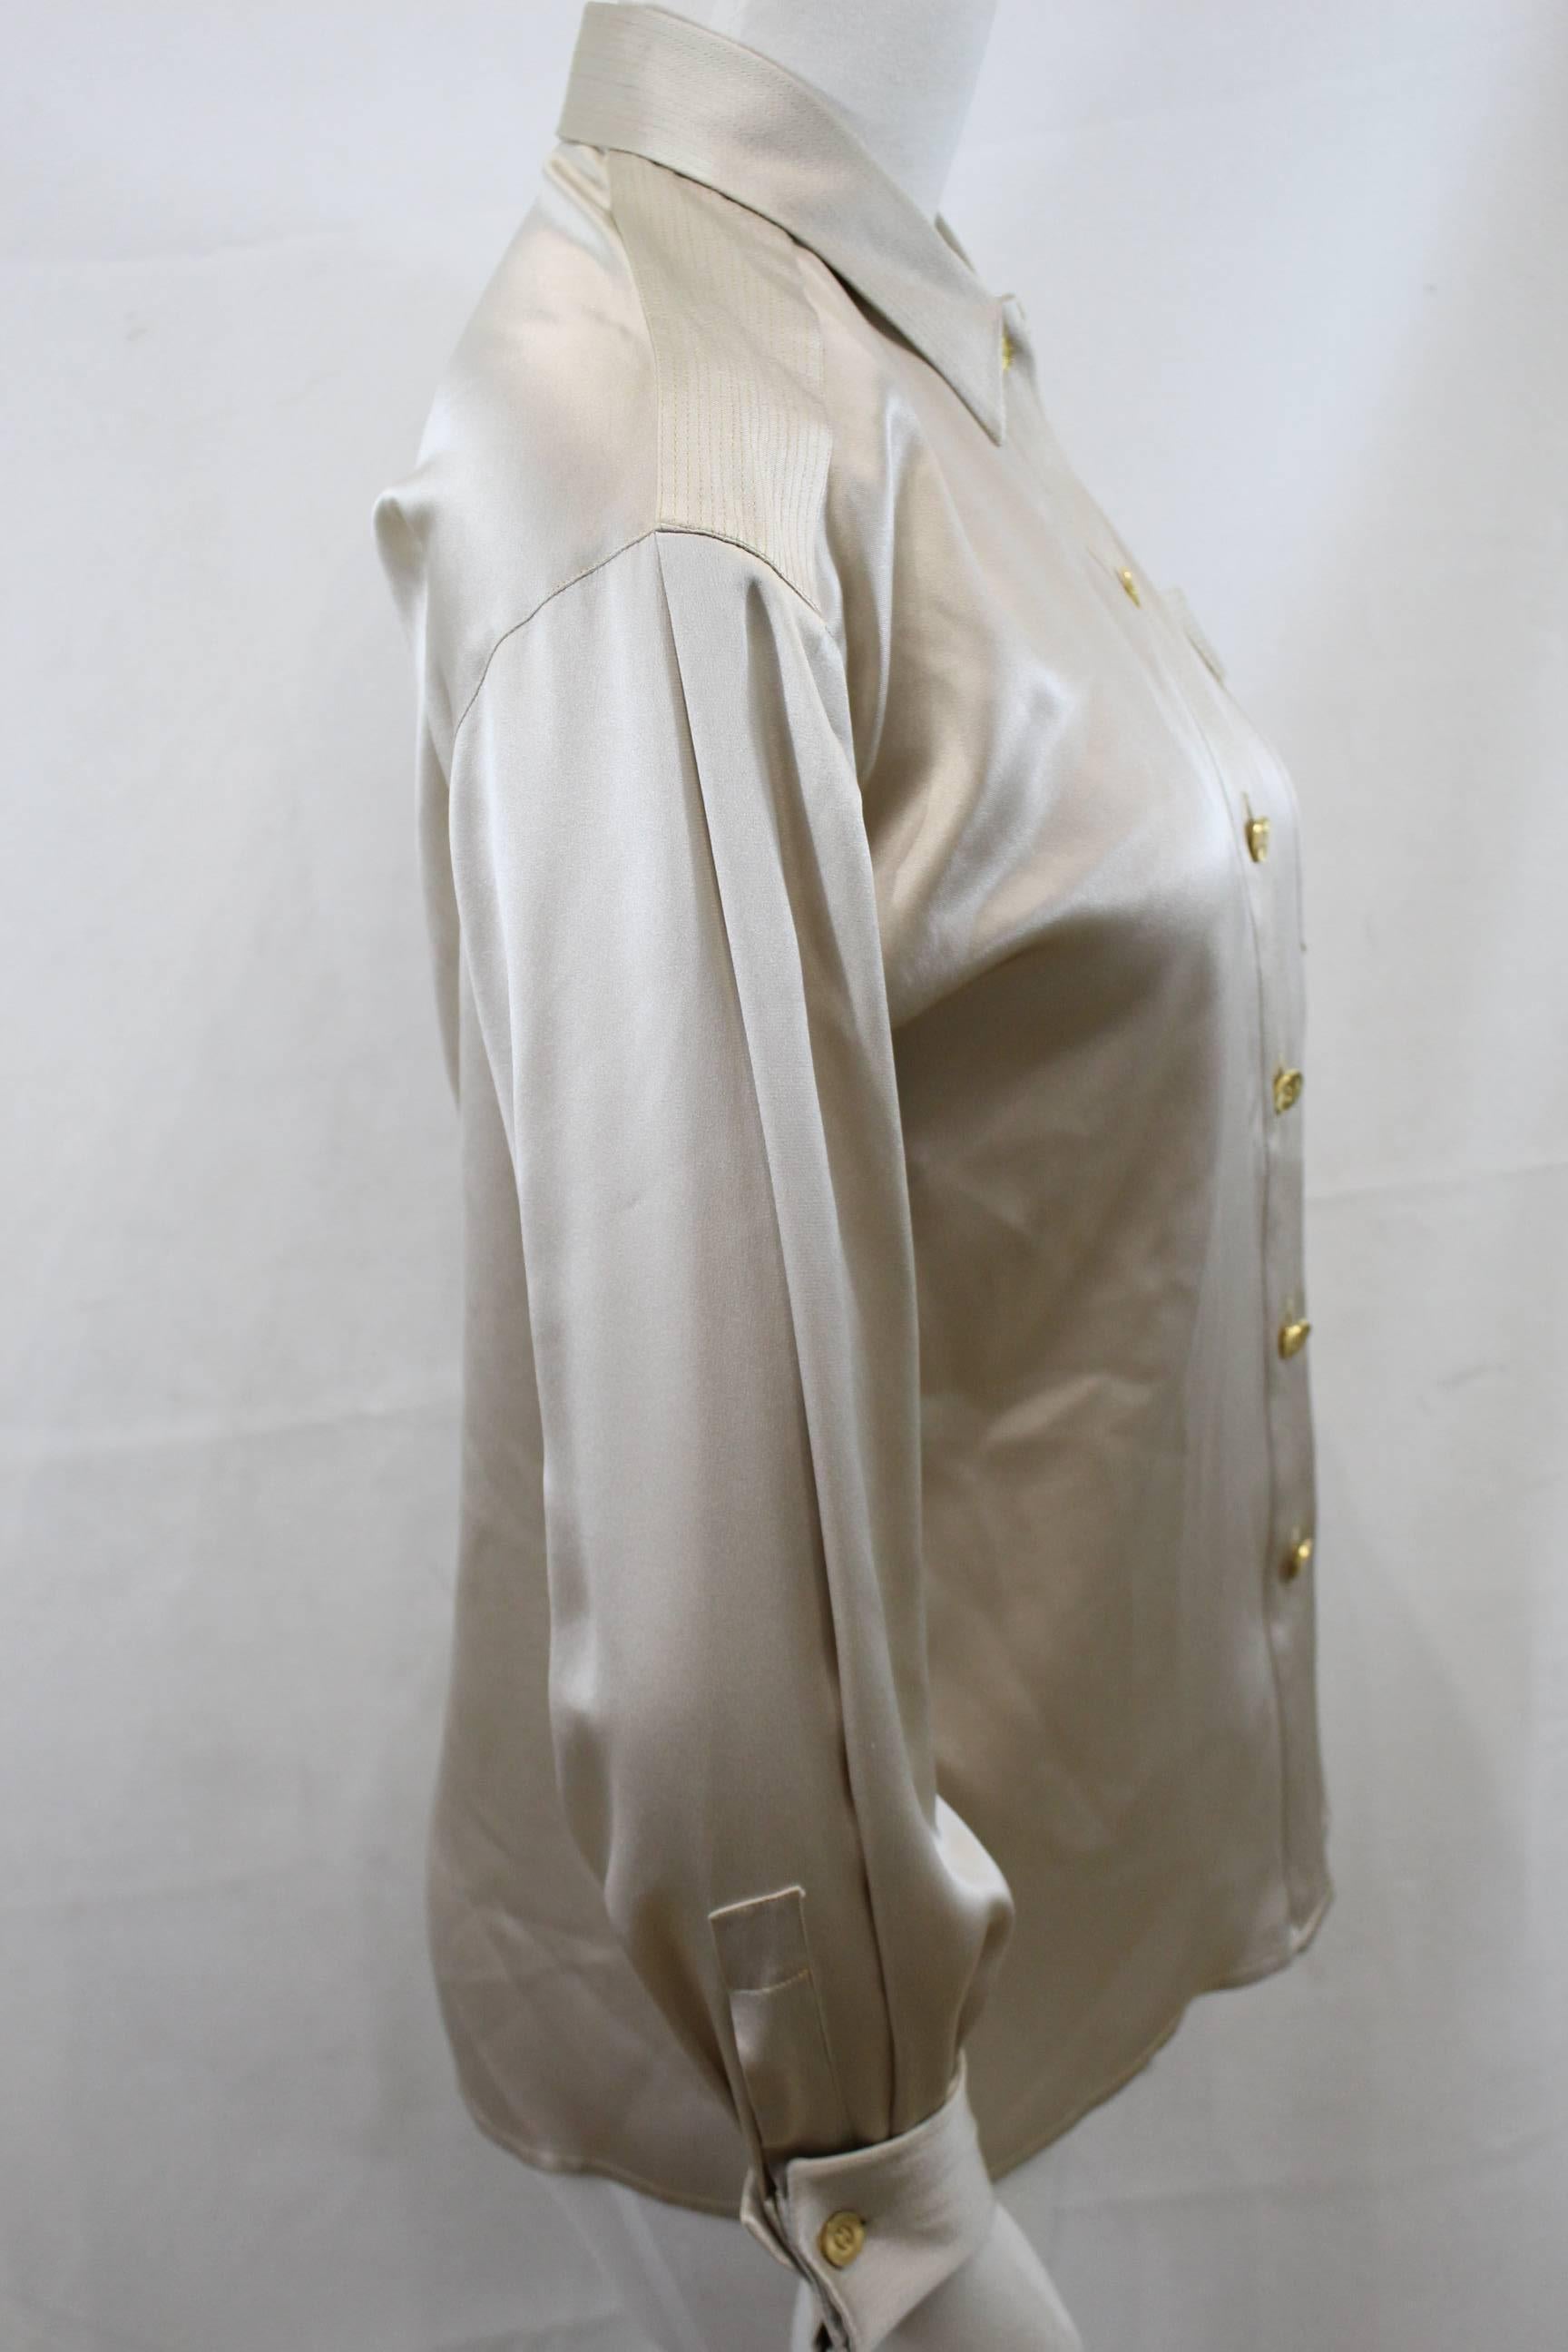 Really nice Chanel Silk blouse form é009 cuirse collection. 

Goldne buttons. 

Cuff closed with a pair of cufflinks.
Fair  condition, some micro stains in the upper part and in armpits, thats why the low price

Size 44 french